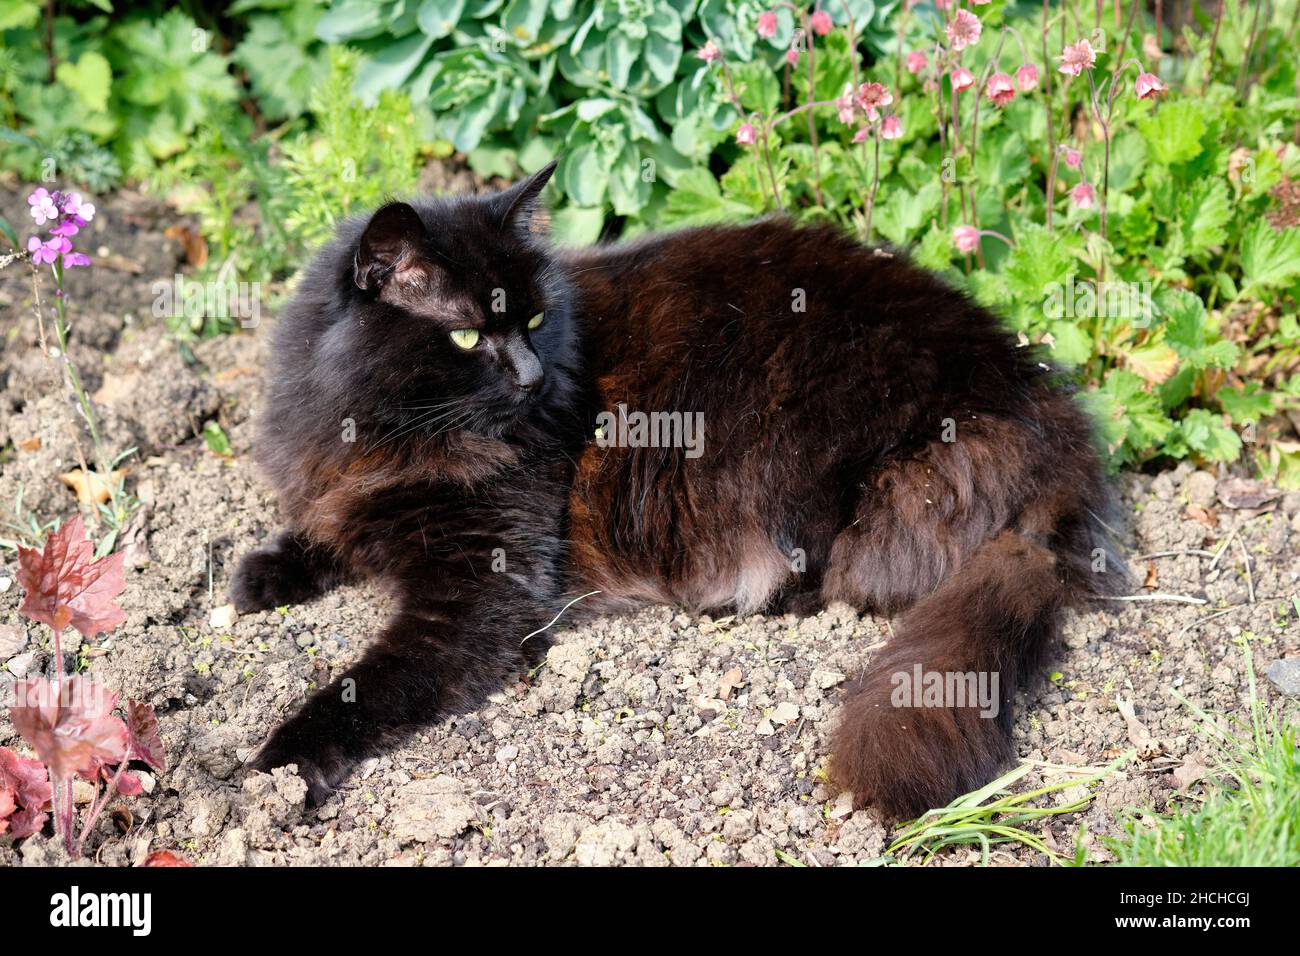 A Black and Brown Domestic Cat, Felis catus, Relaxing in a Garden Flowerbed during the Summer. Stock Photo